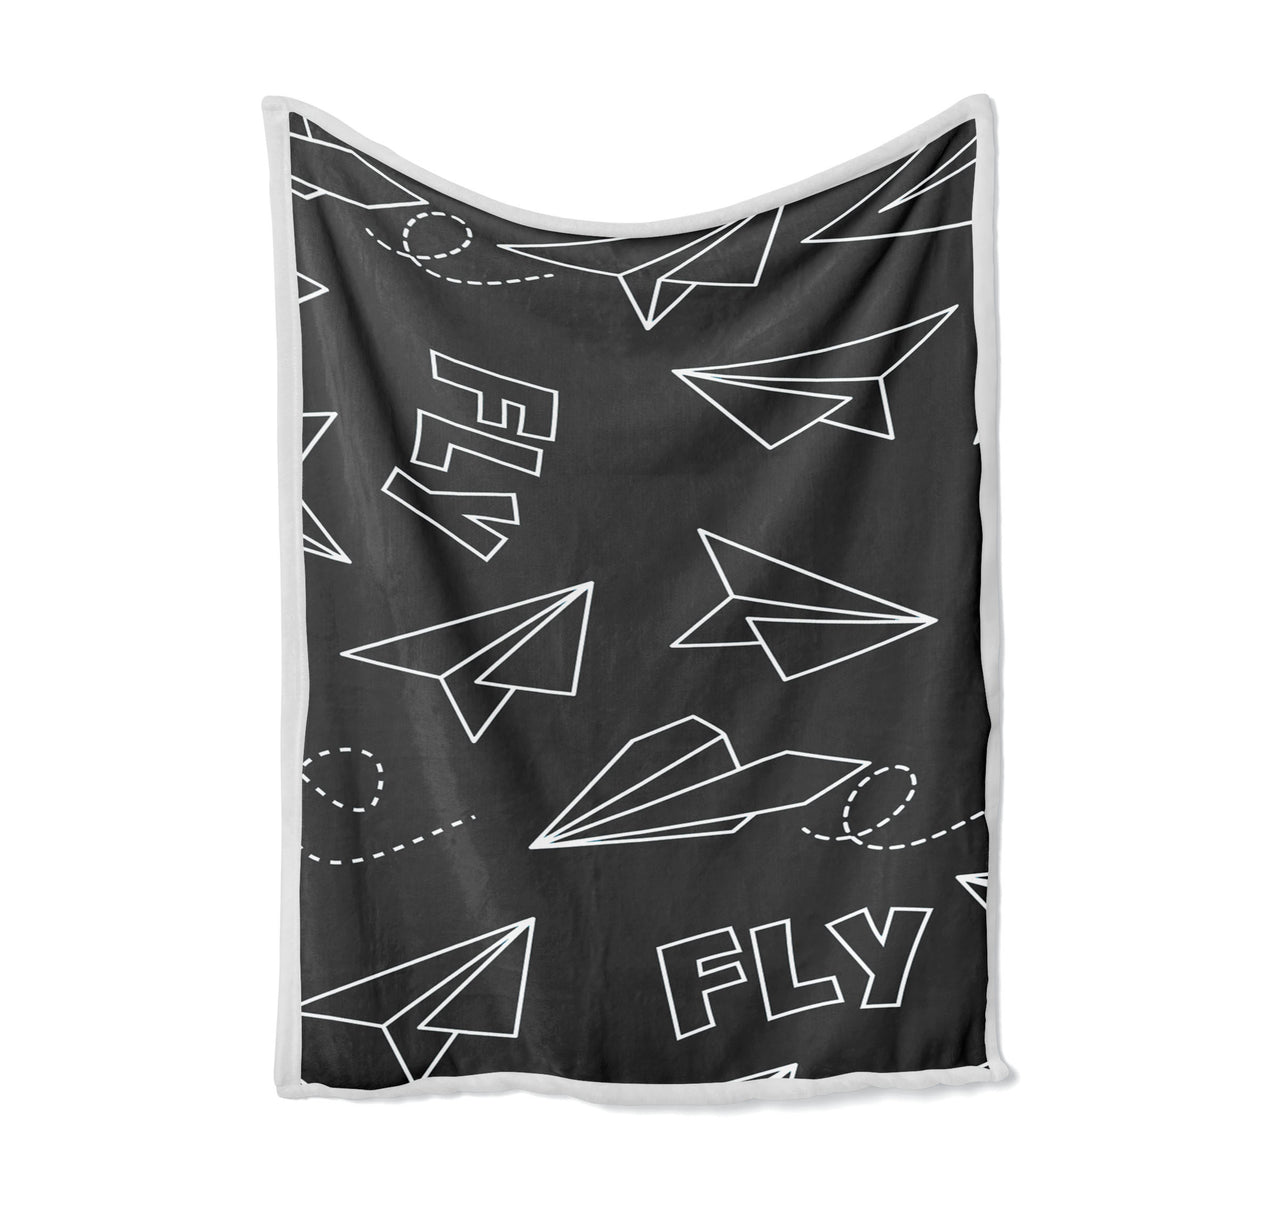 Paper Airplane & Fly-Gray Designed Bed Blankets & Covers